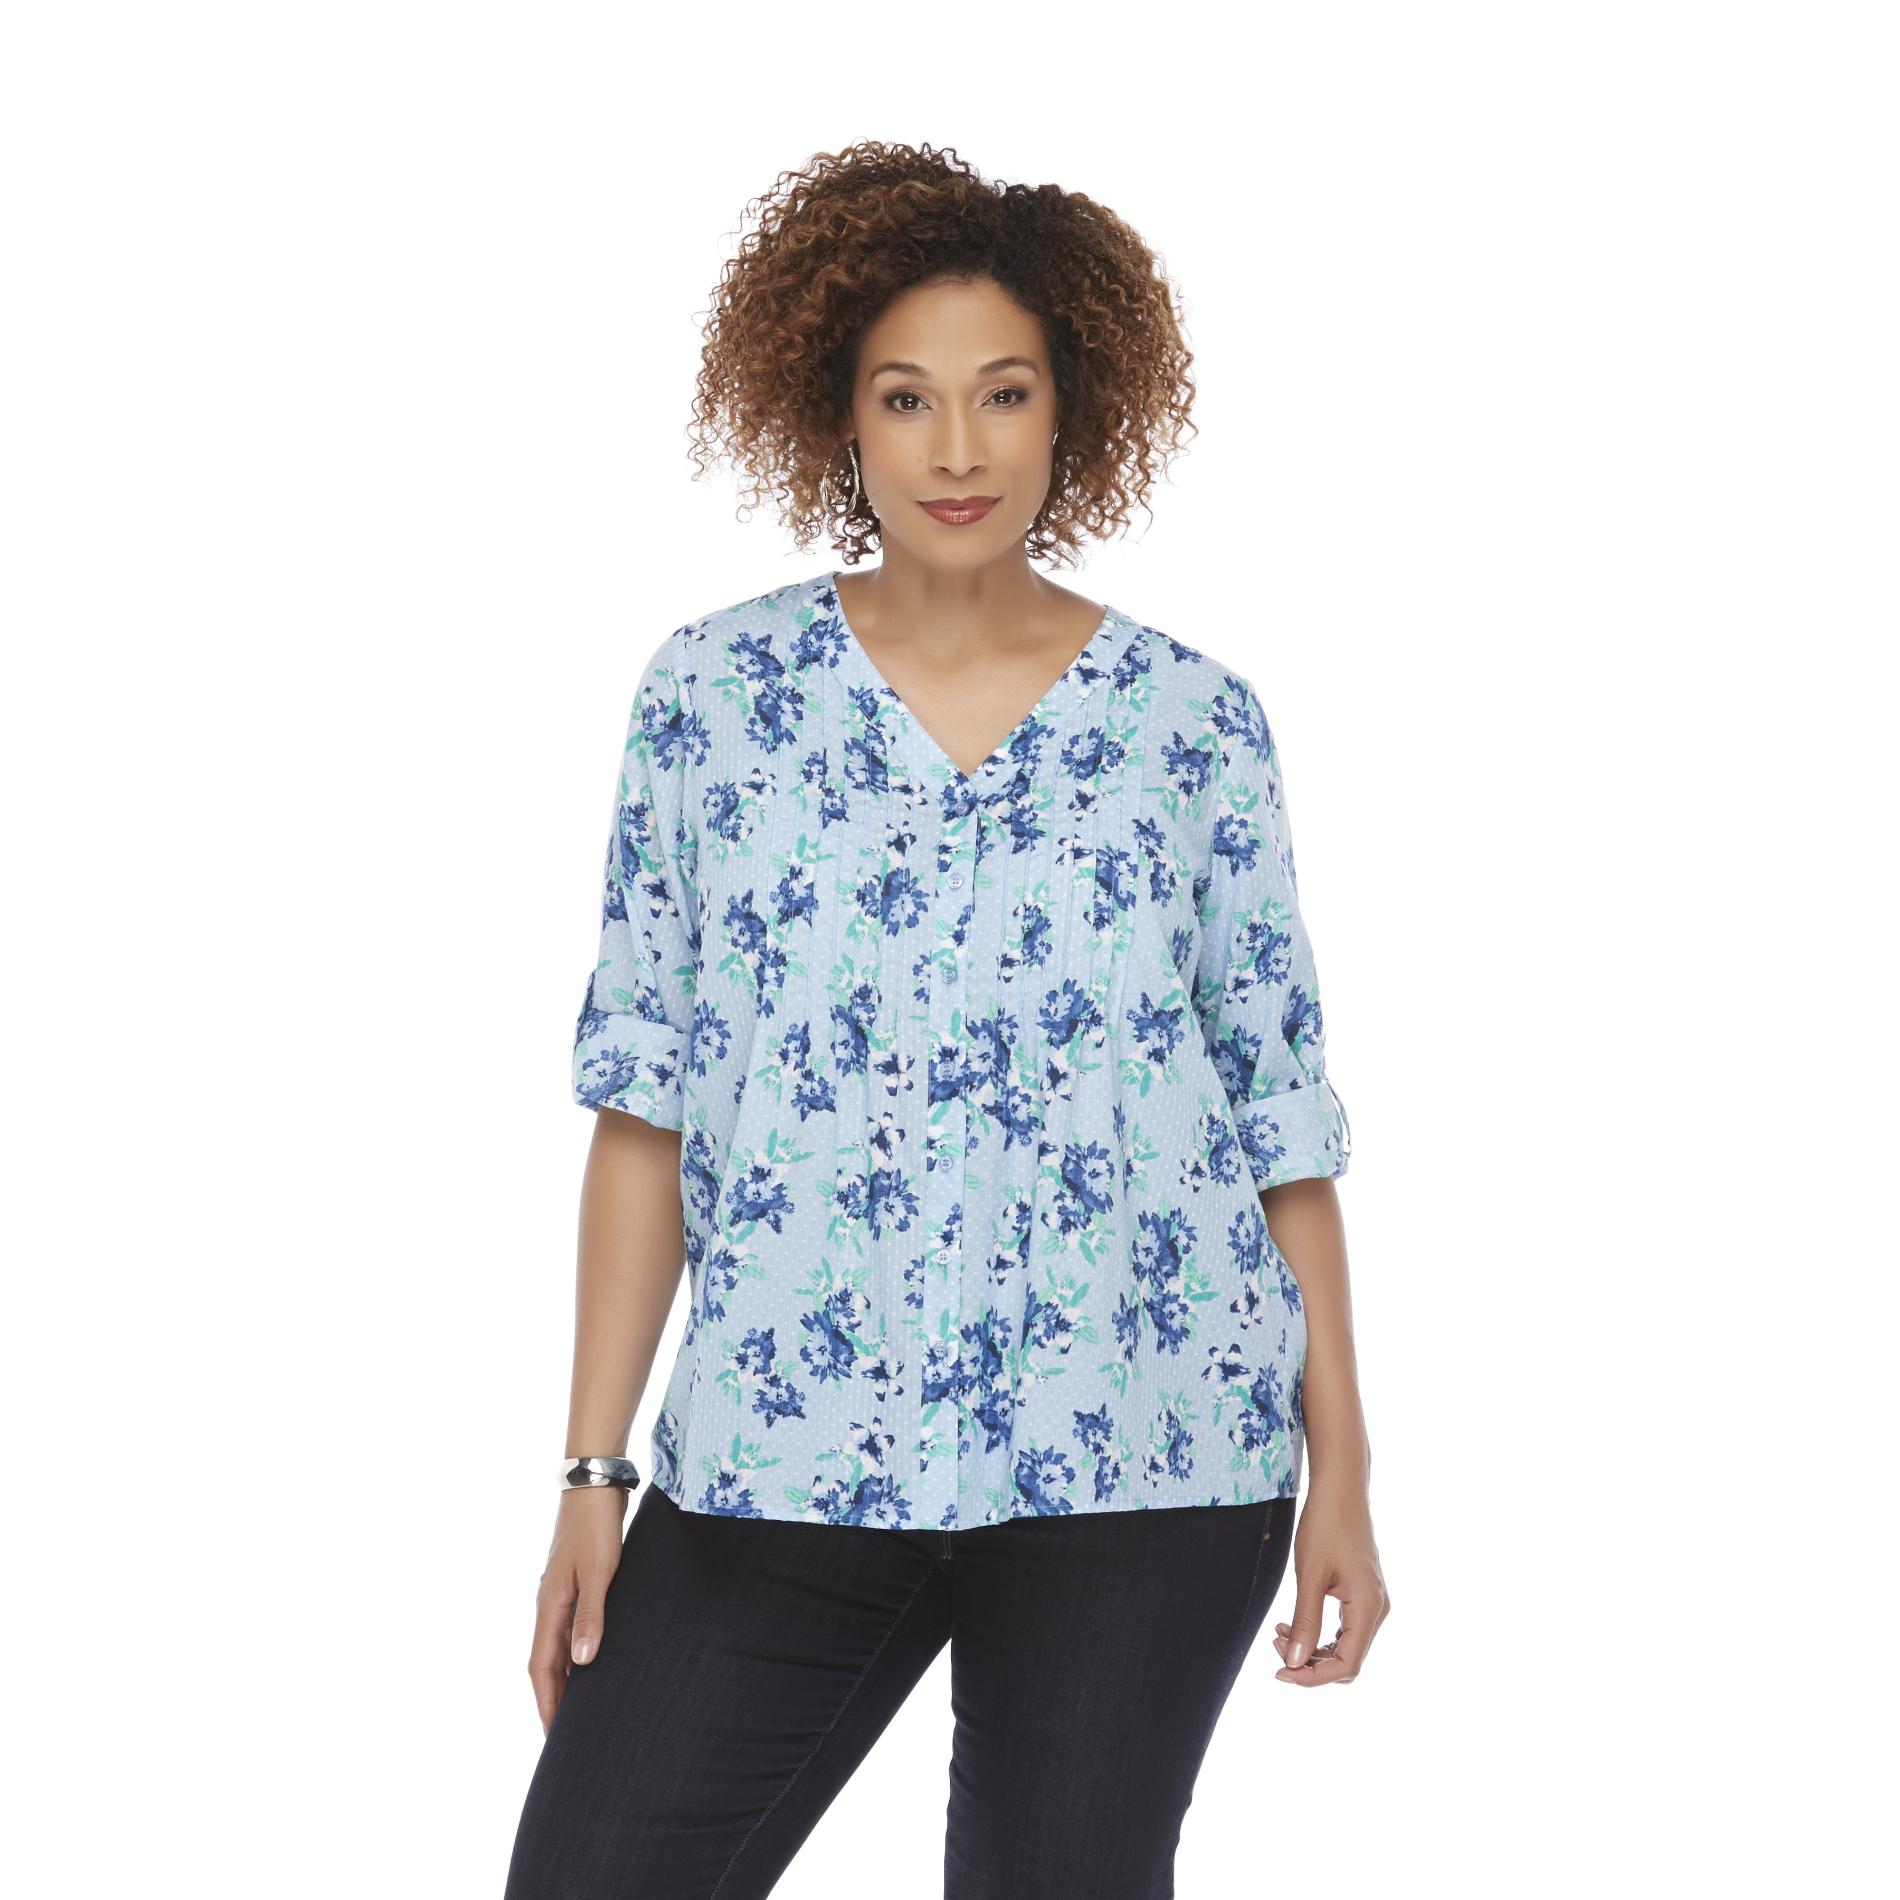 Basic Editions Women's Plus Pleated Top - Floral & Polka Dot